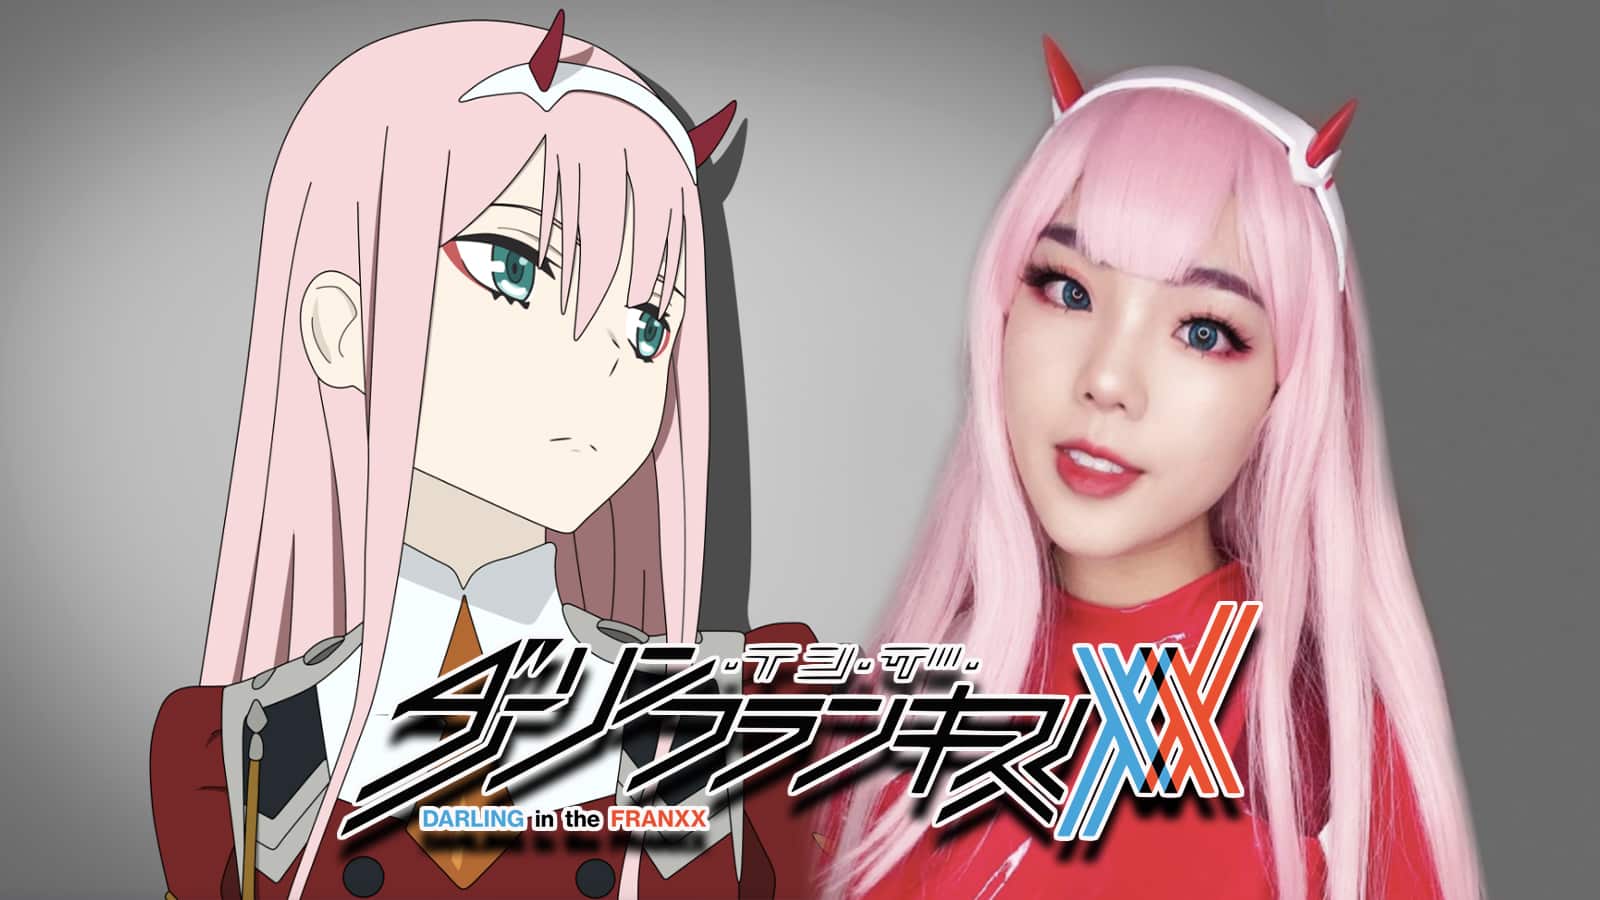 Darling in the Franxx Zero Two next to Cosplayer